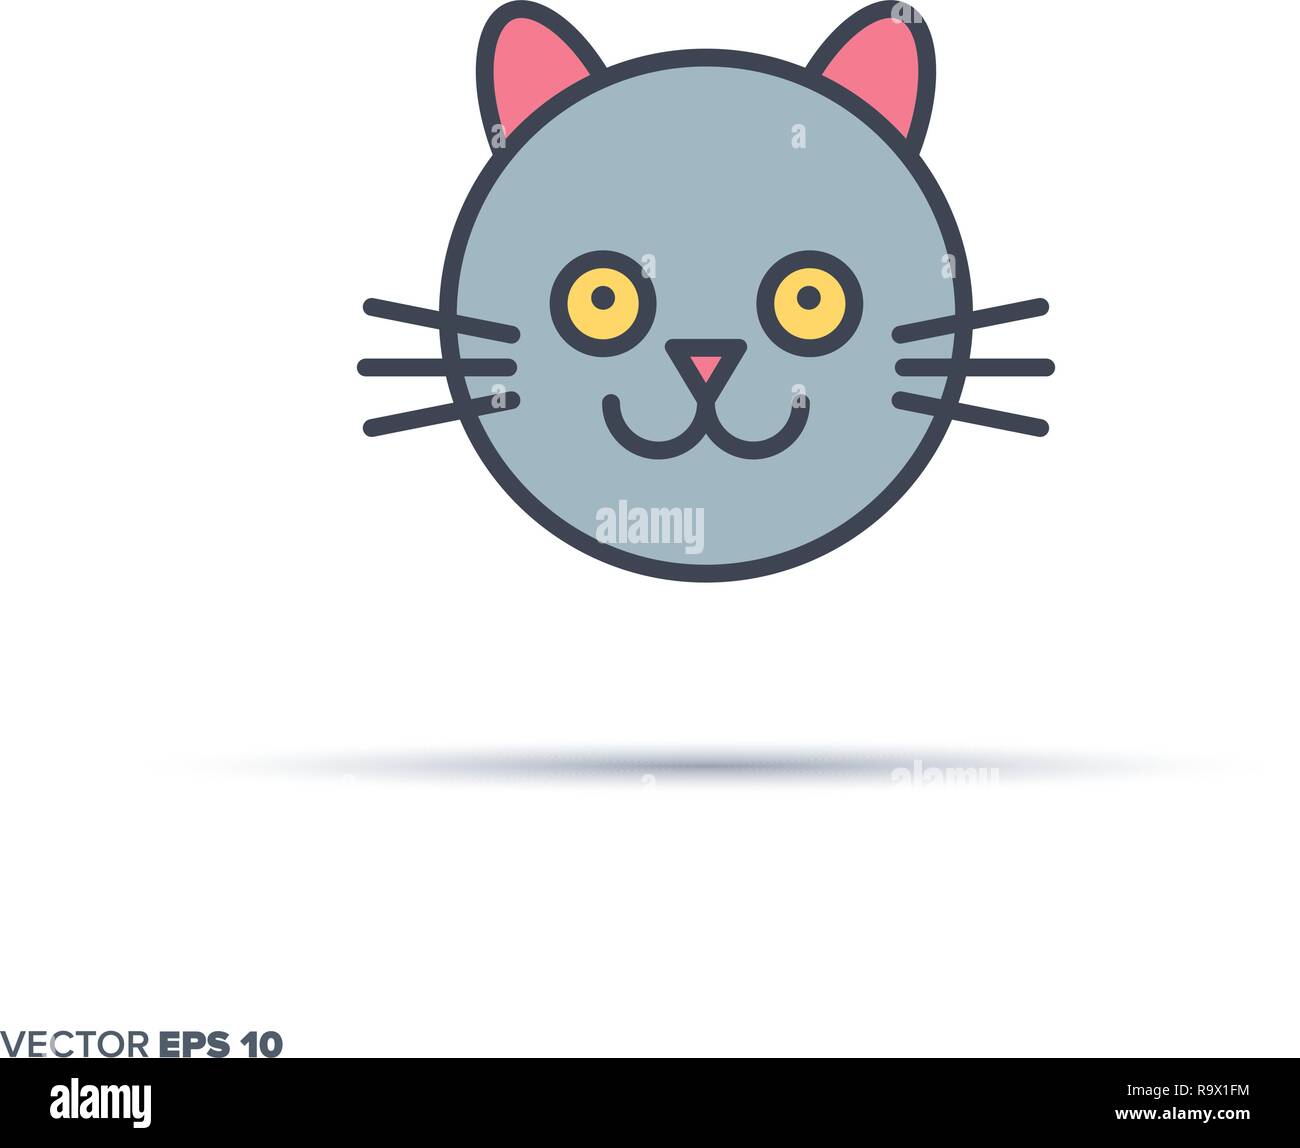 Cute cat icon. pink cat icon on white background. happy cat icon standing  and modern for illustration., Stock vector